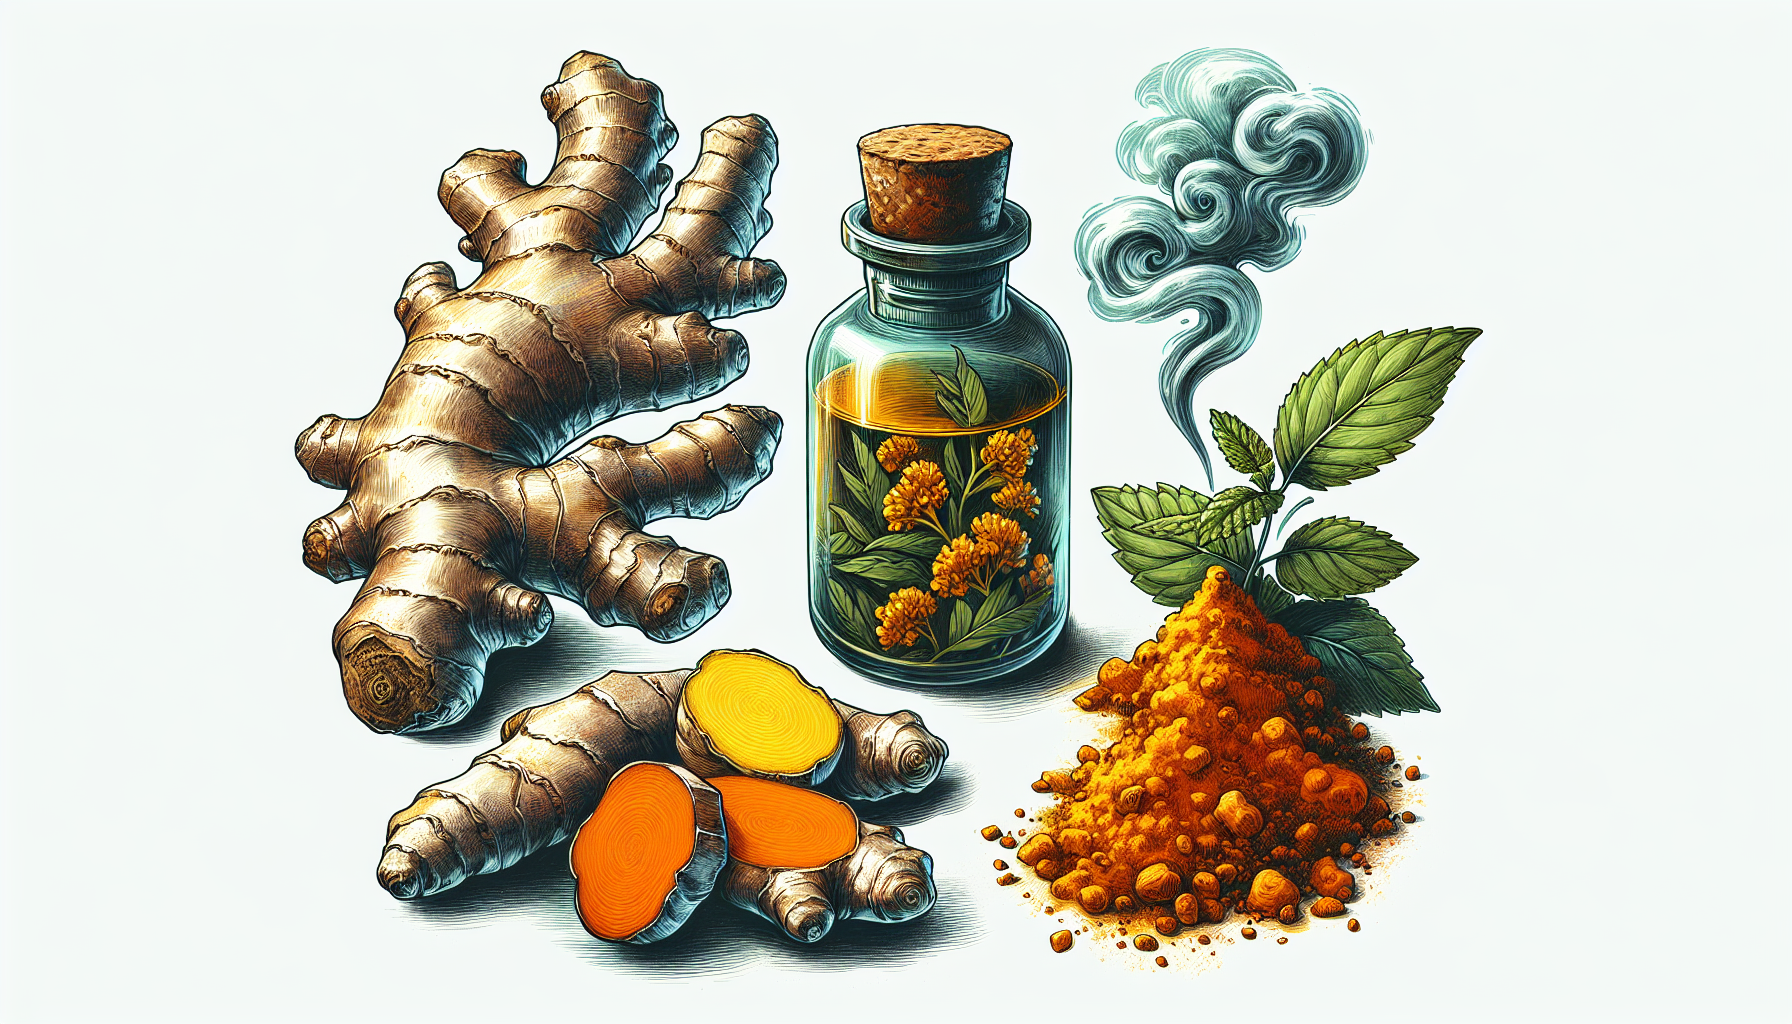 Illustration of herbal remedies for gastrointestinal wellness